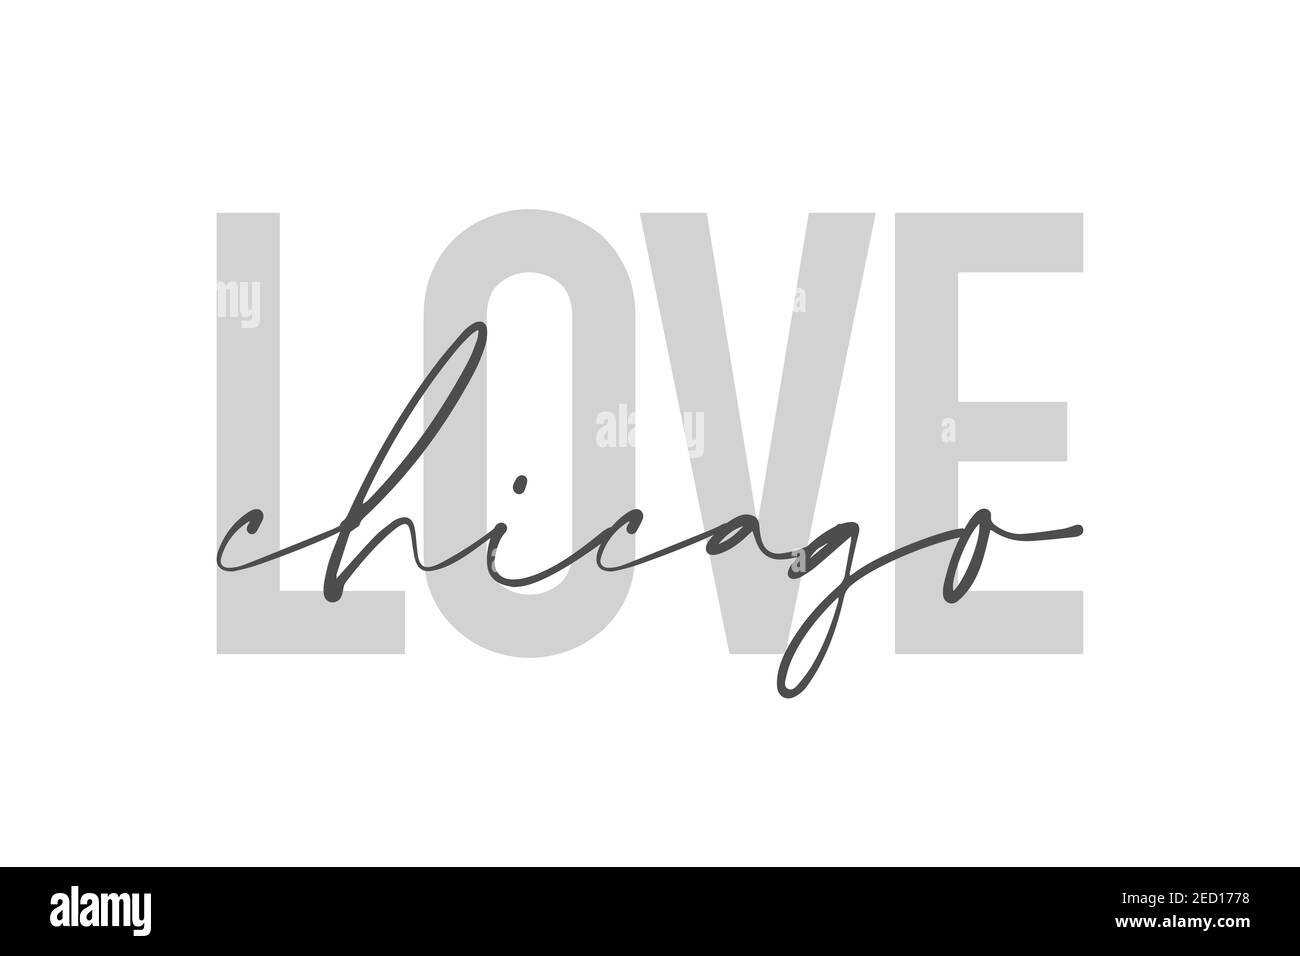 Modern, urban, simple graphic design of a saying 'Love Chicago' in grey colors. Trendy, cool, handwritten typography Stock Photo